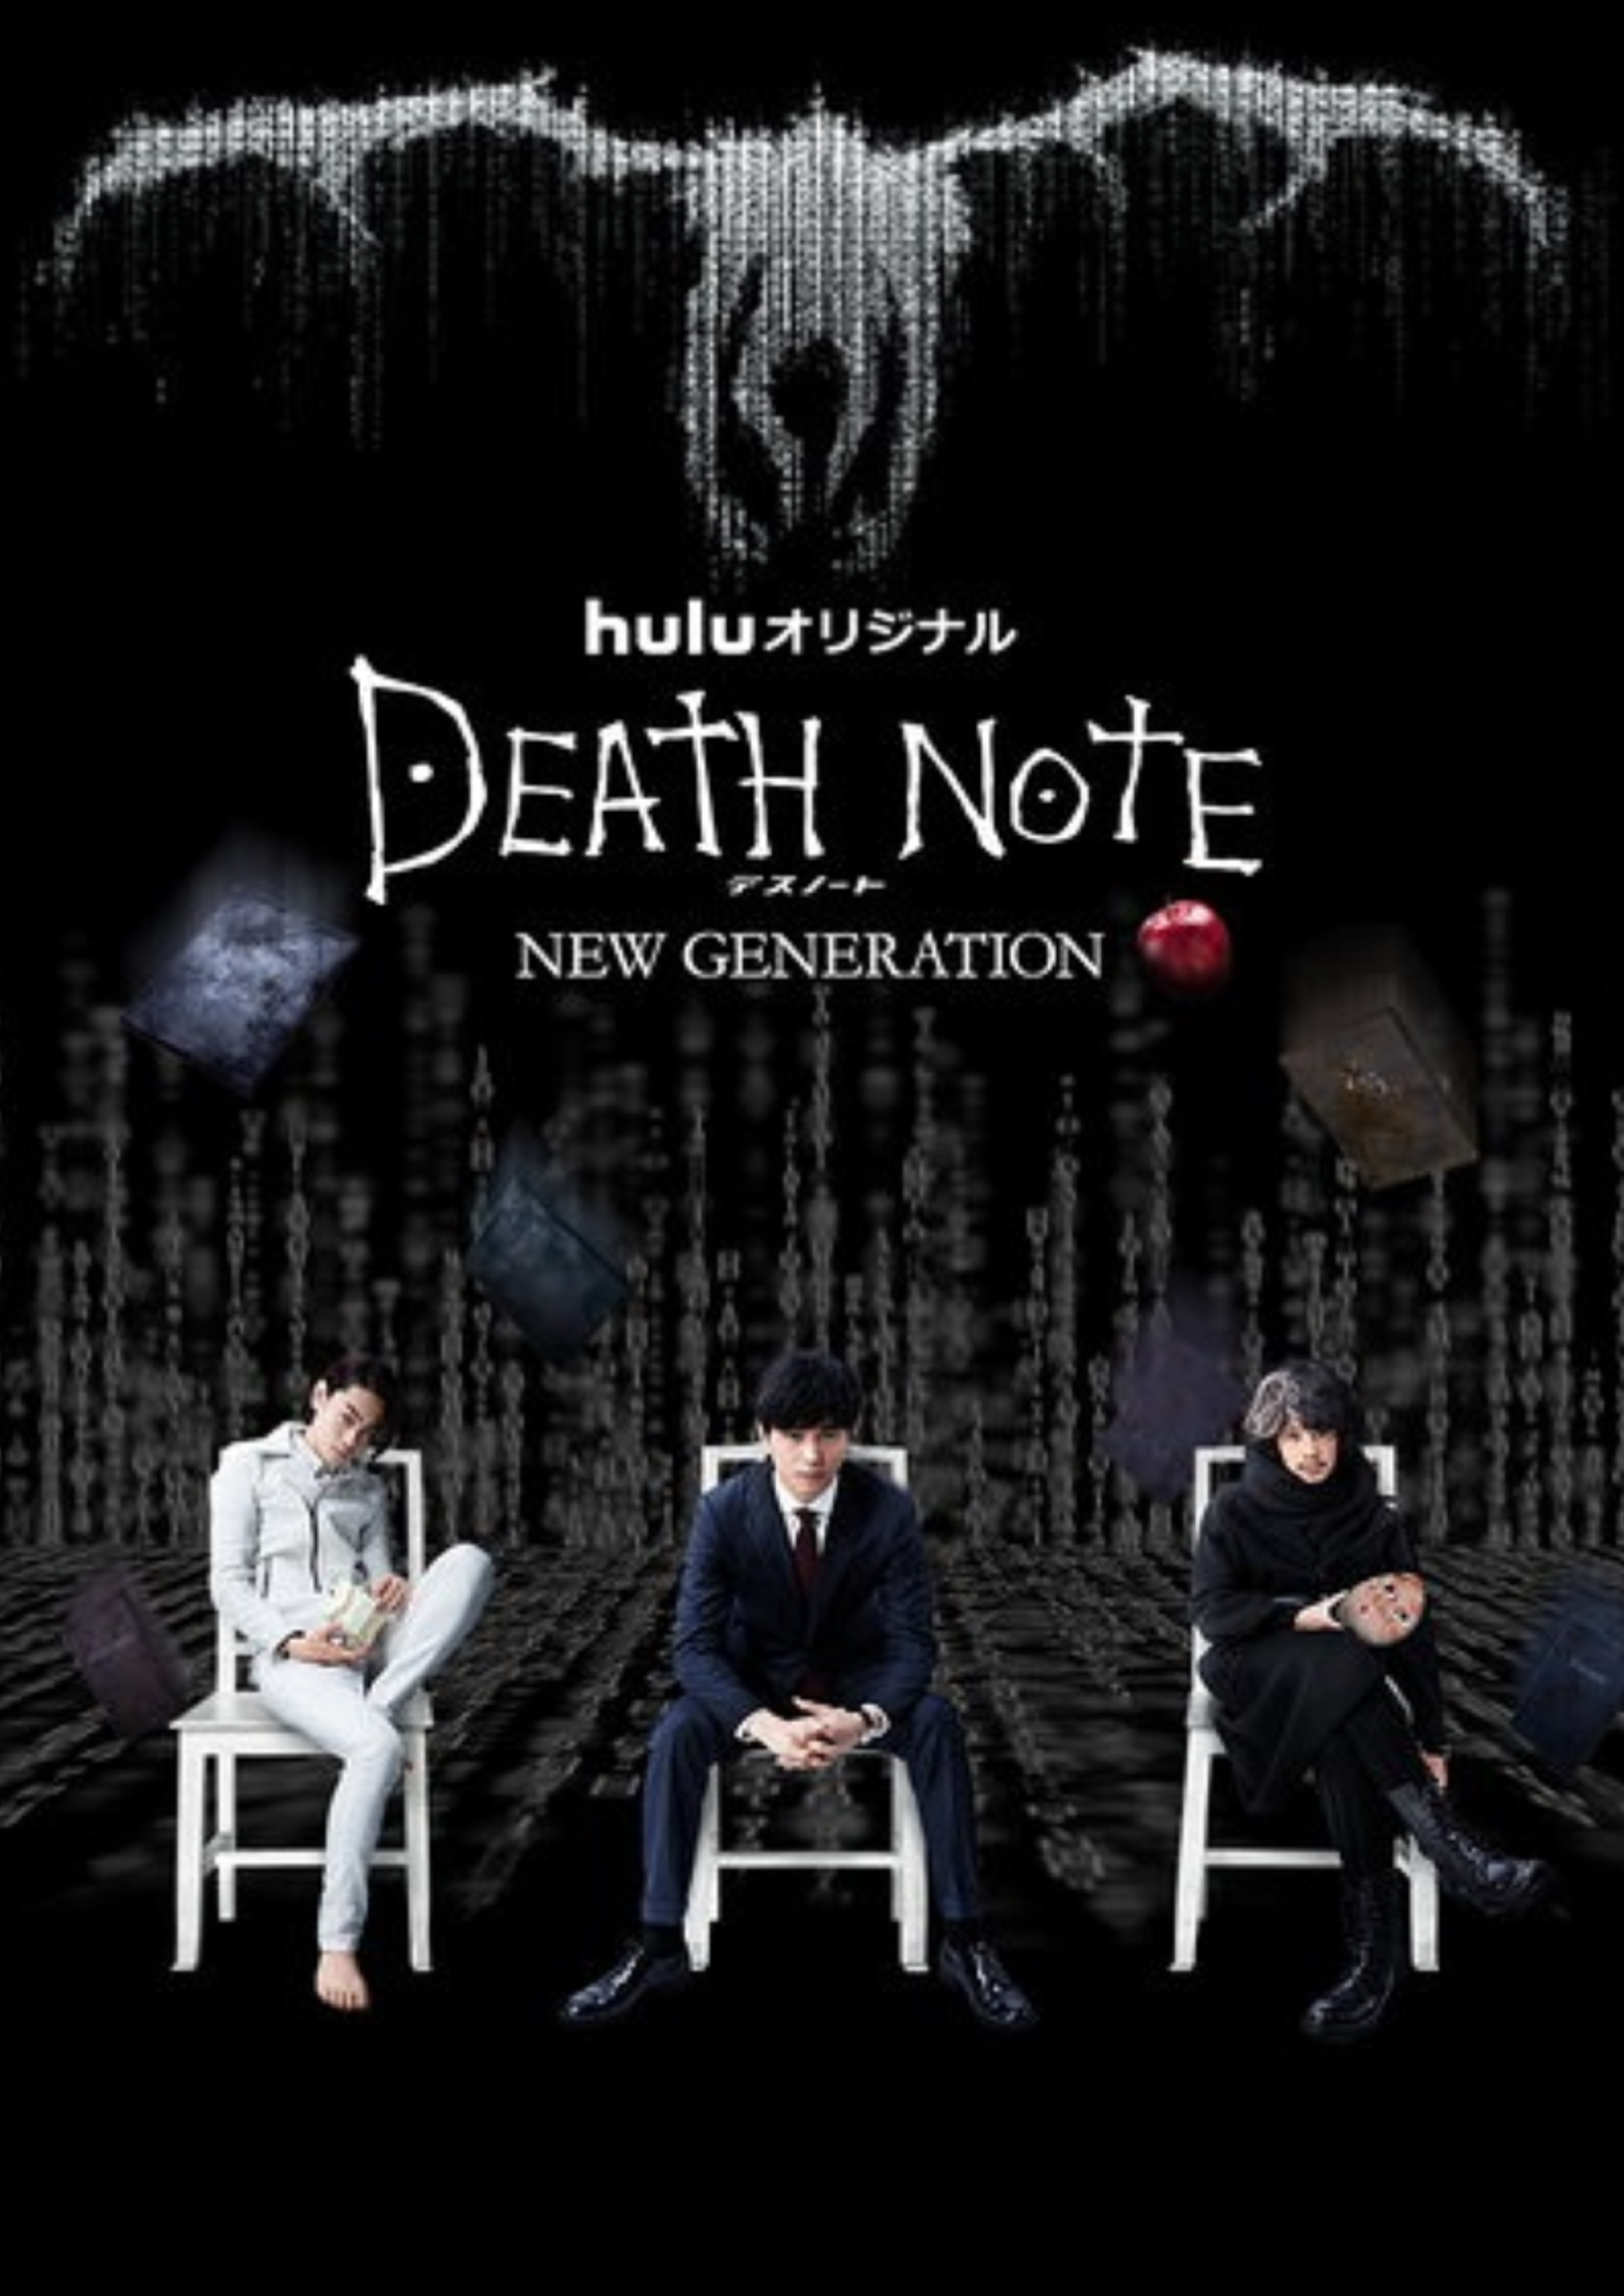 The Death Note Main Poster